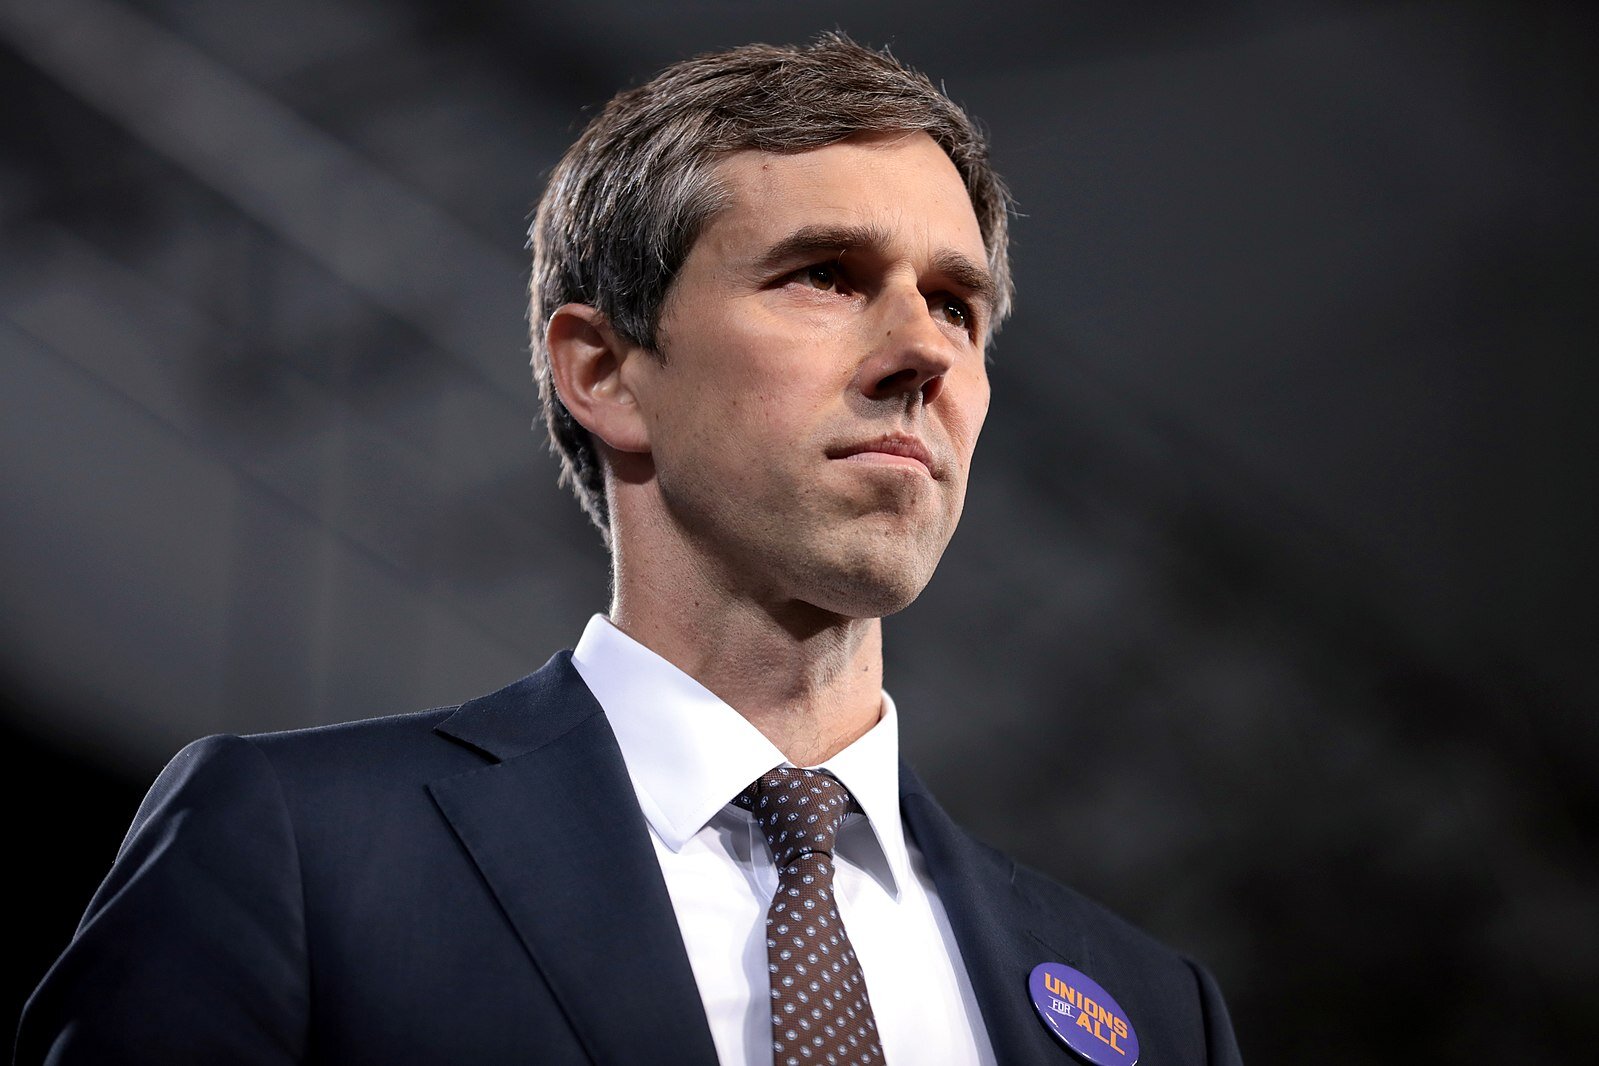 April 29, 2019 – Former U.S. Congressman Beto O'Rourke speaking with attendees at the 2019 National Forum on Wages and Working People hosted by the Center for the American Progress Action Fund and the SEIU at the Enclave in Las Vegas, Nevada. (Photo by Gage Skidmore | Wikimedia Commons)